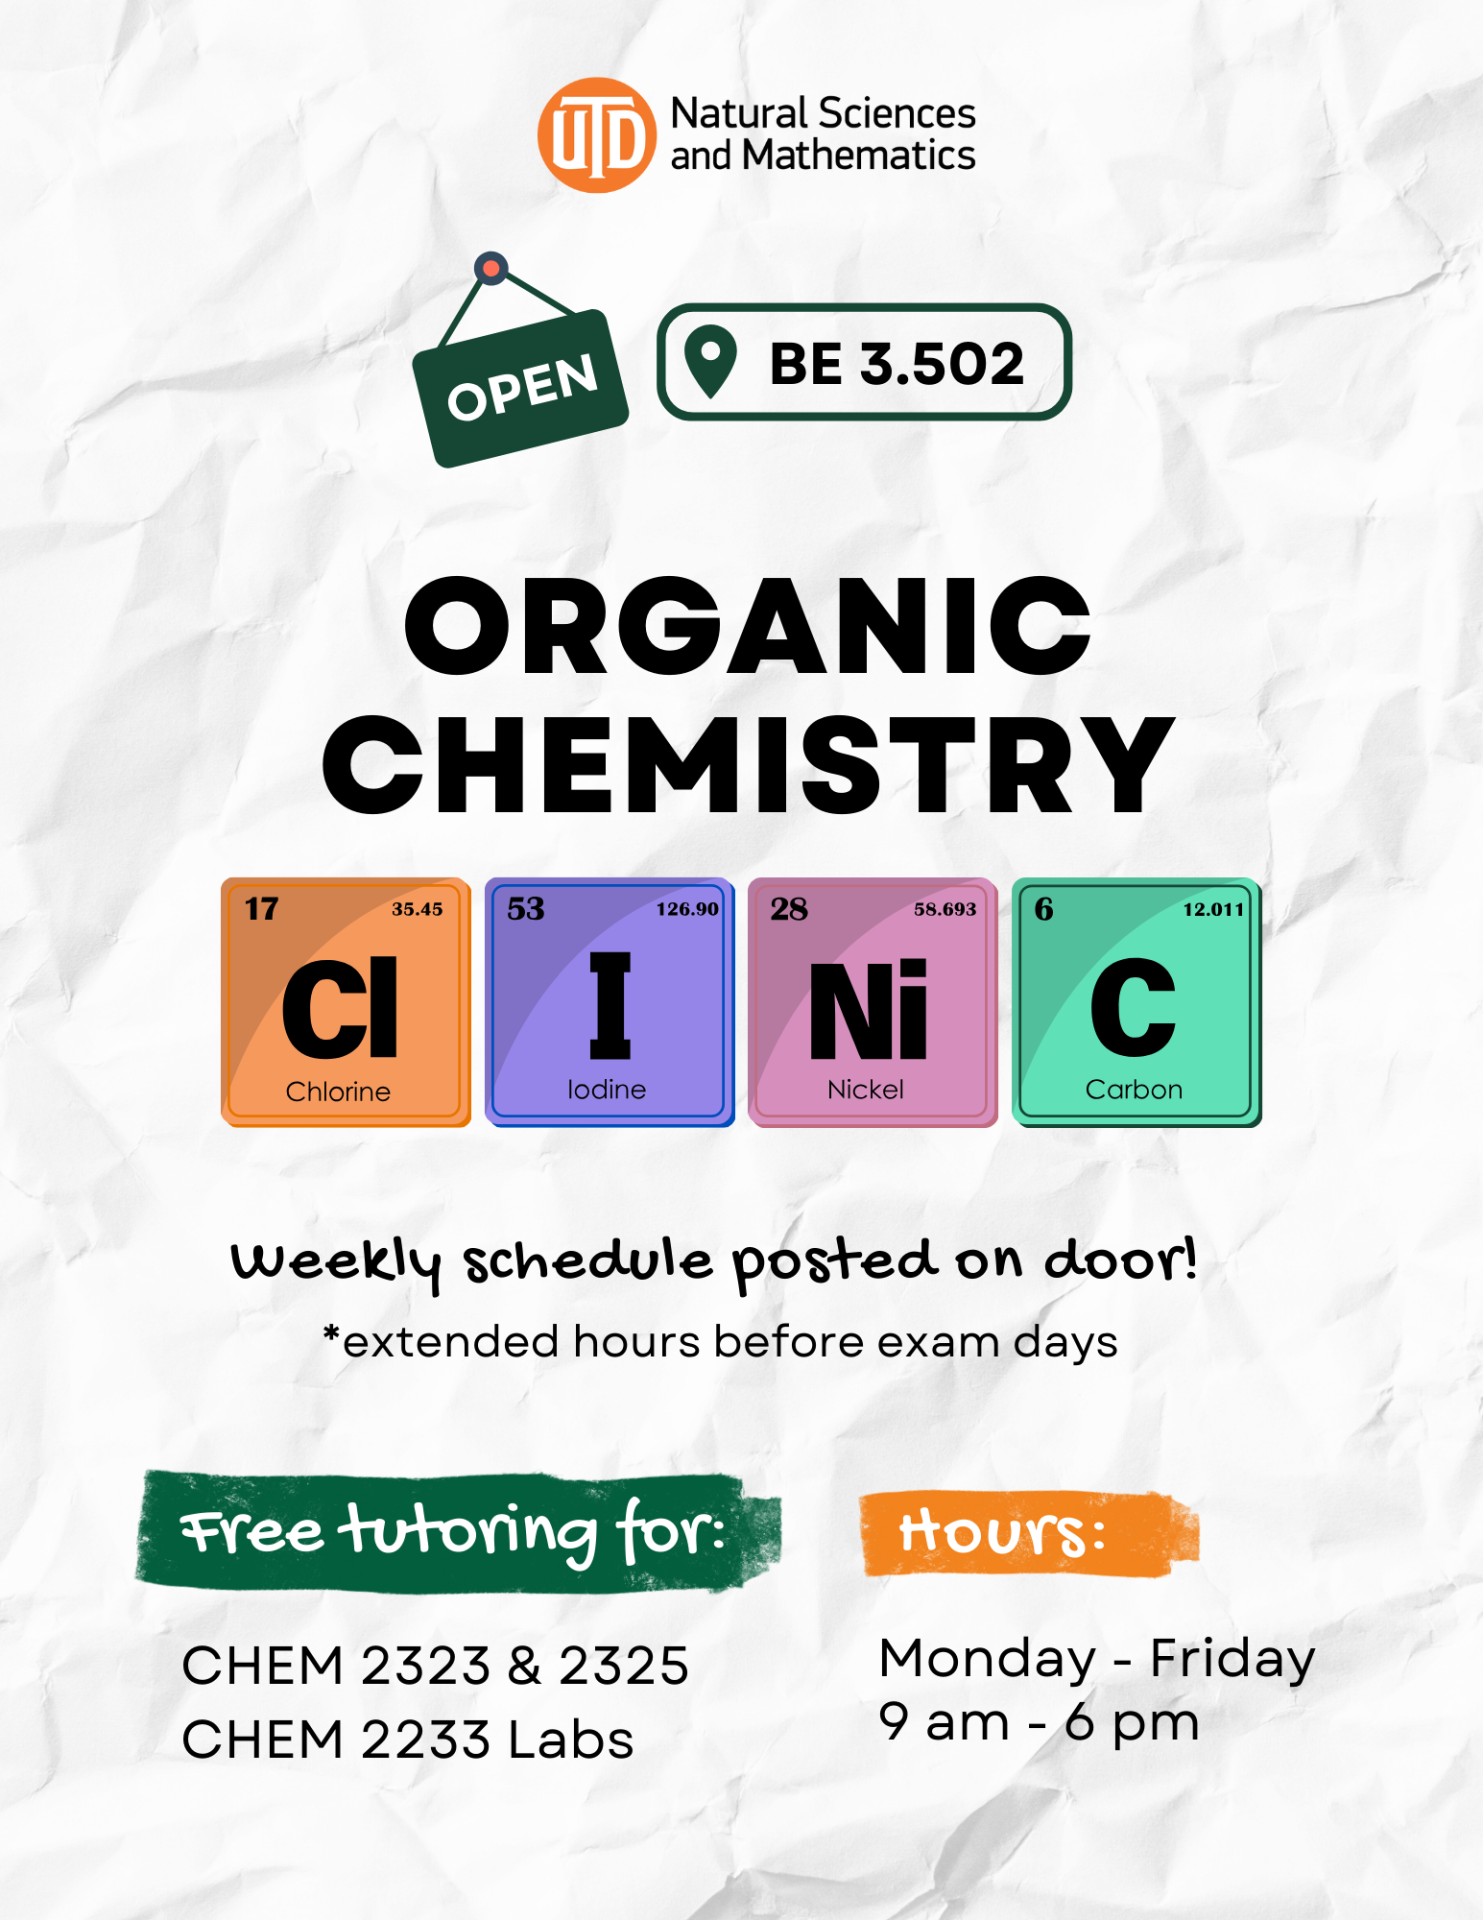 Organic Chemistry Clinic: Free Tutoring for Organic Chemistry (lecture and labs) at BE 3.502, Monday- Friday 9 am-6 pm.